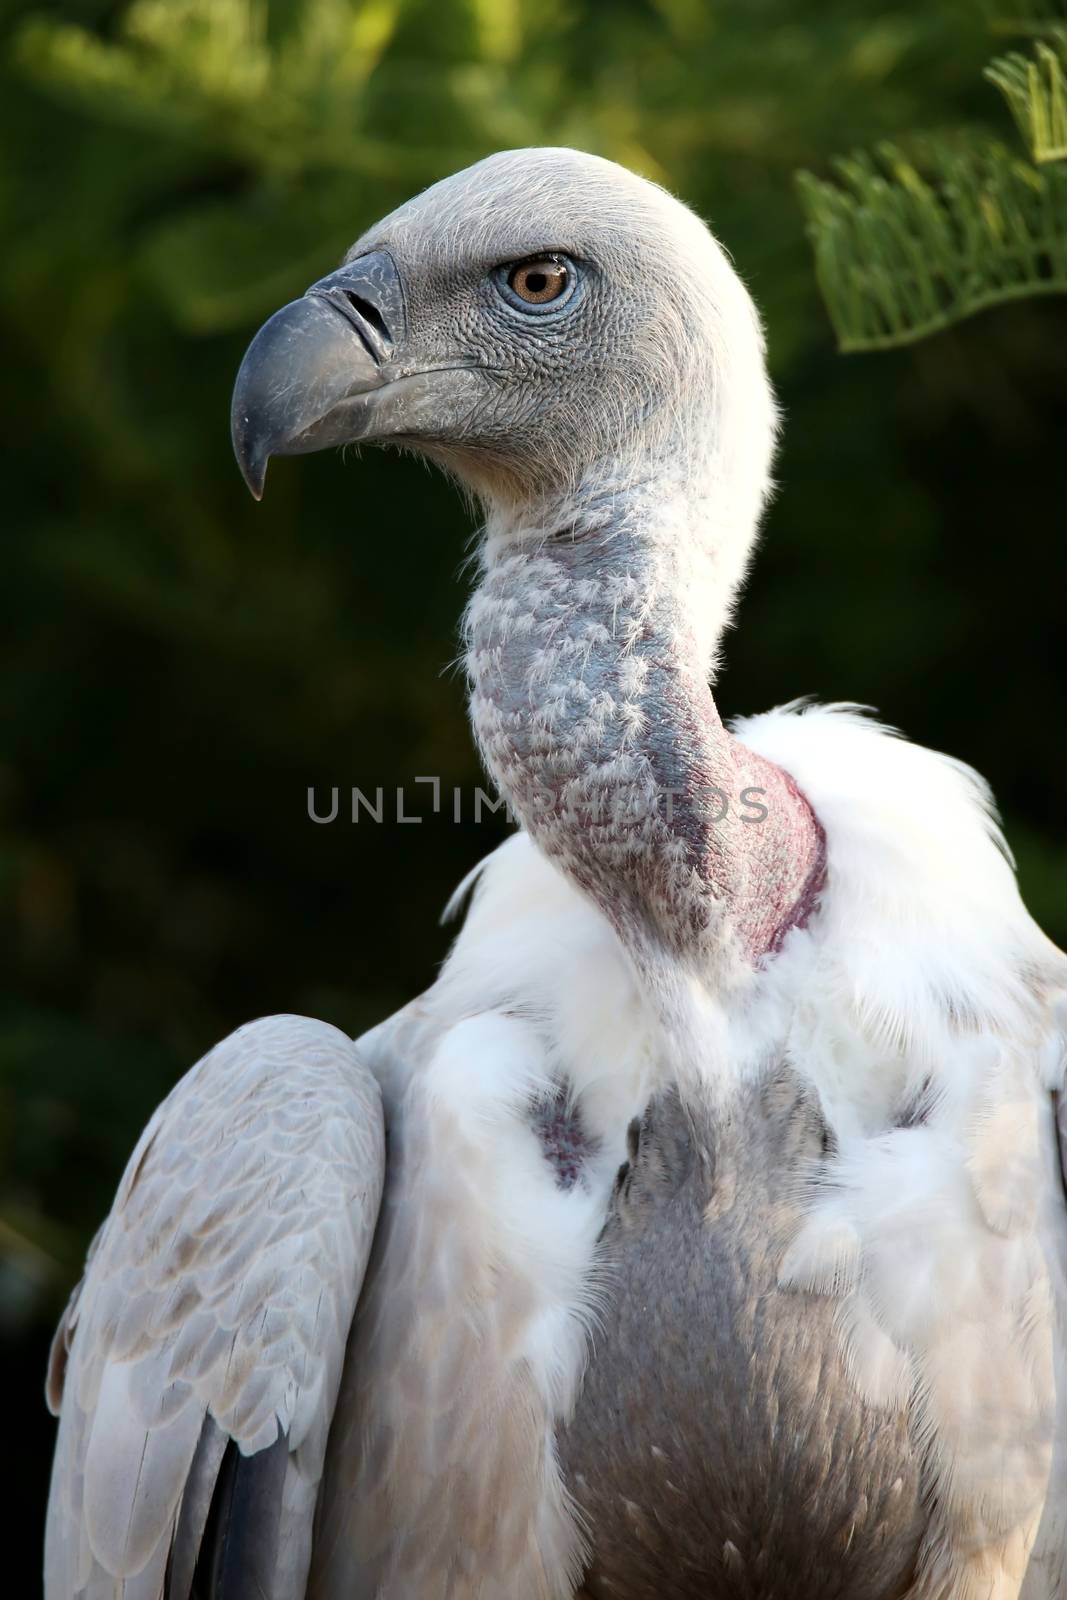 Portrait of a Griffon's vulture bird with a large hooked beak